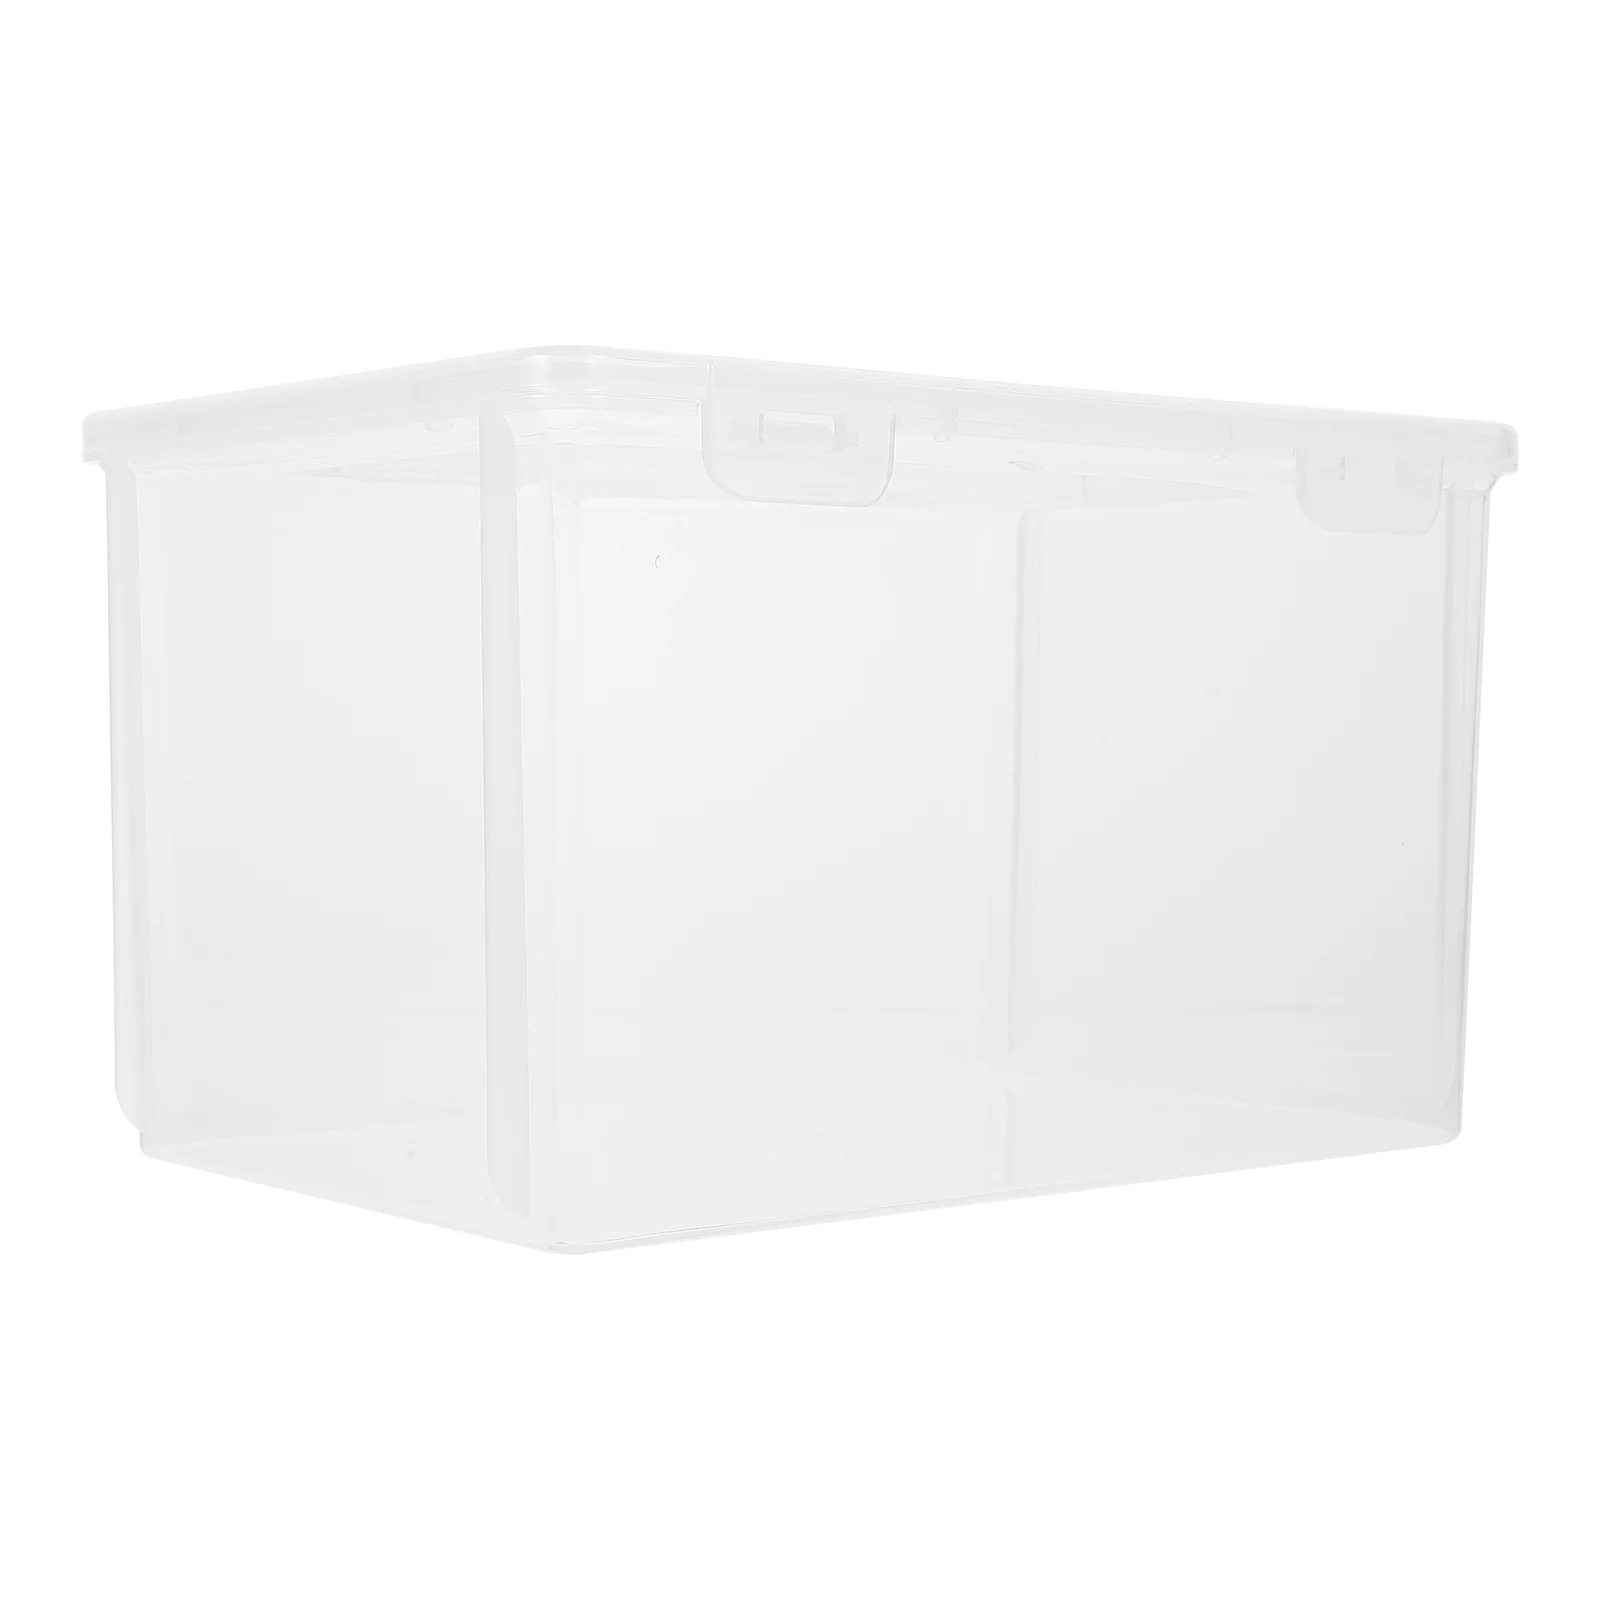 

Bread Container Box Storage Keeper Dispenser Loaf Case Clear Plastic Containers Holder Toast Cake Refrigerator Bin Airtight